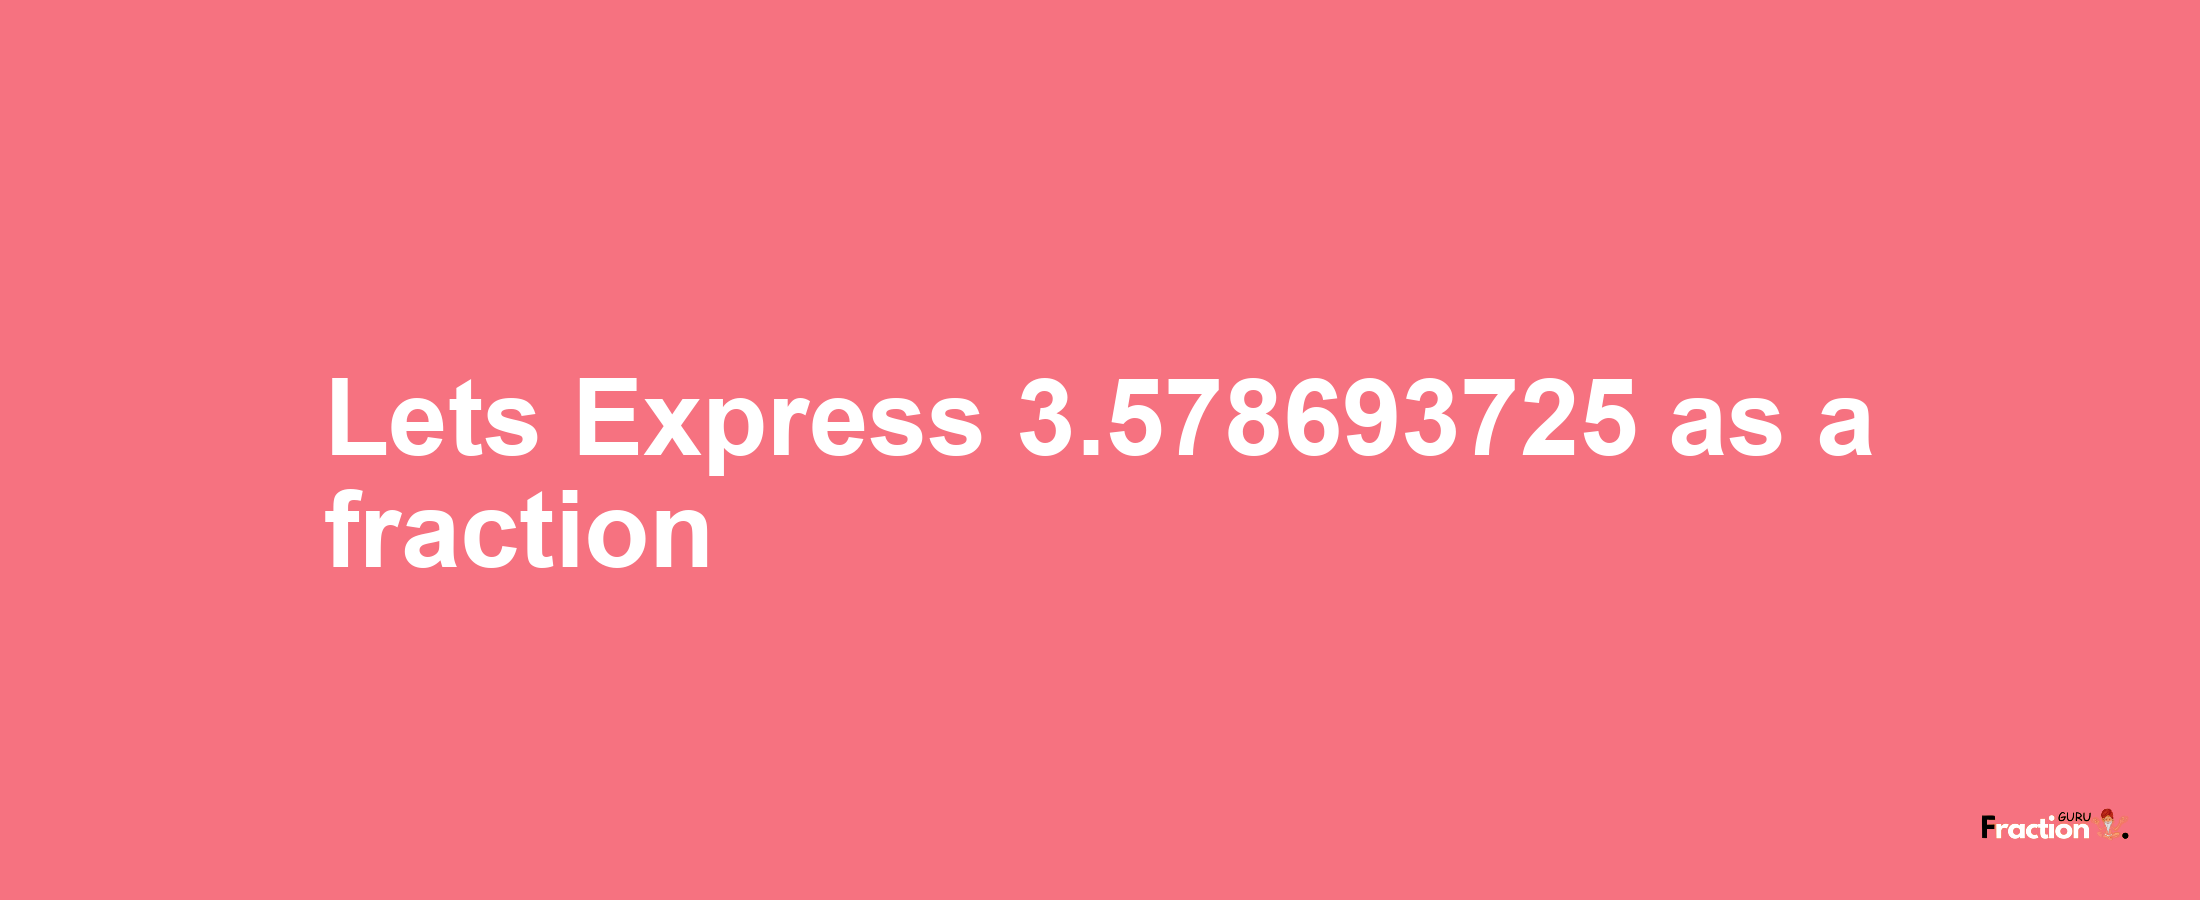 Lets Express 3.578693725 as afraction